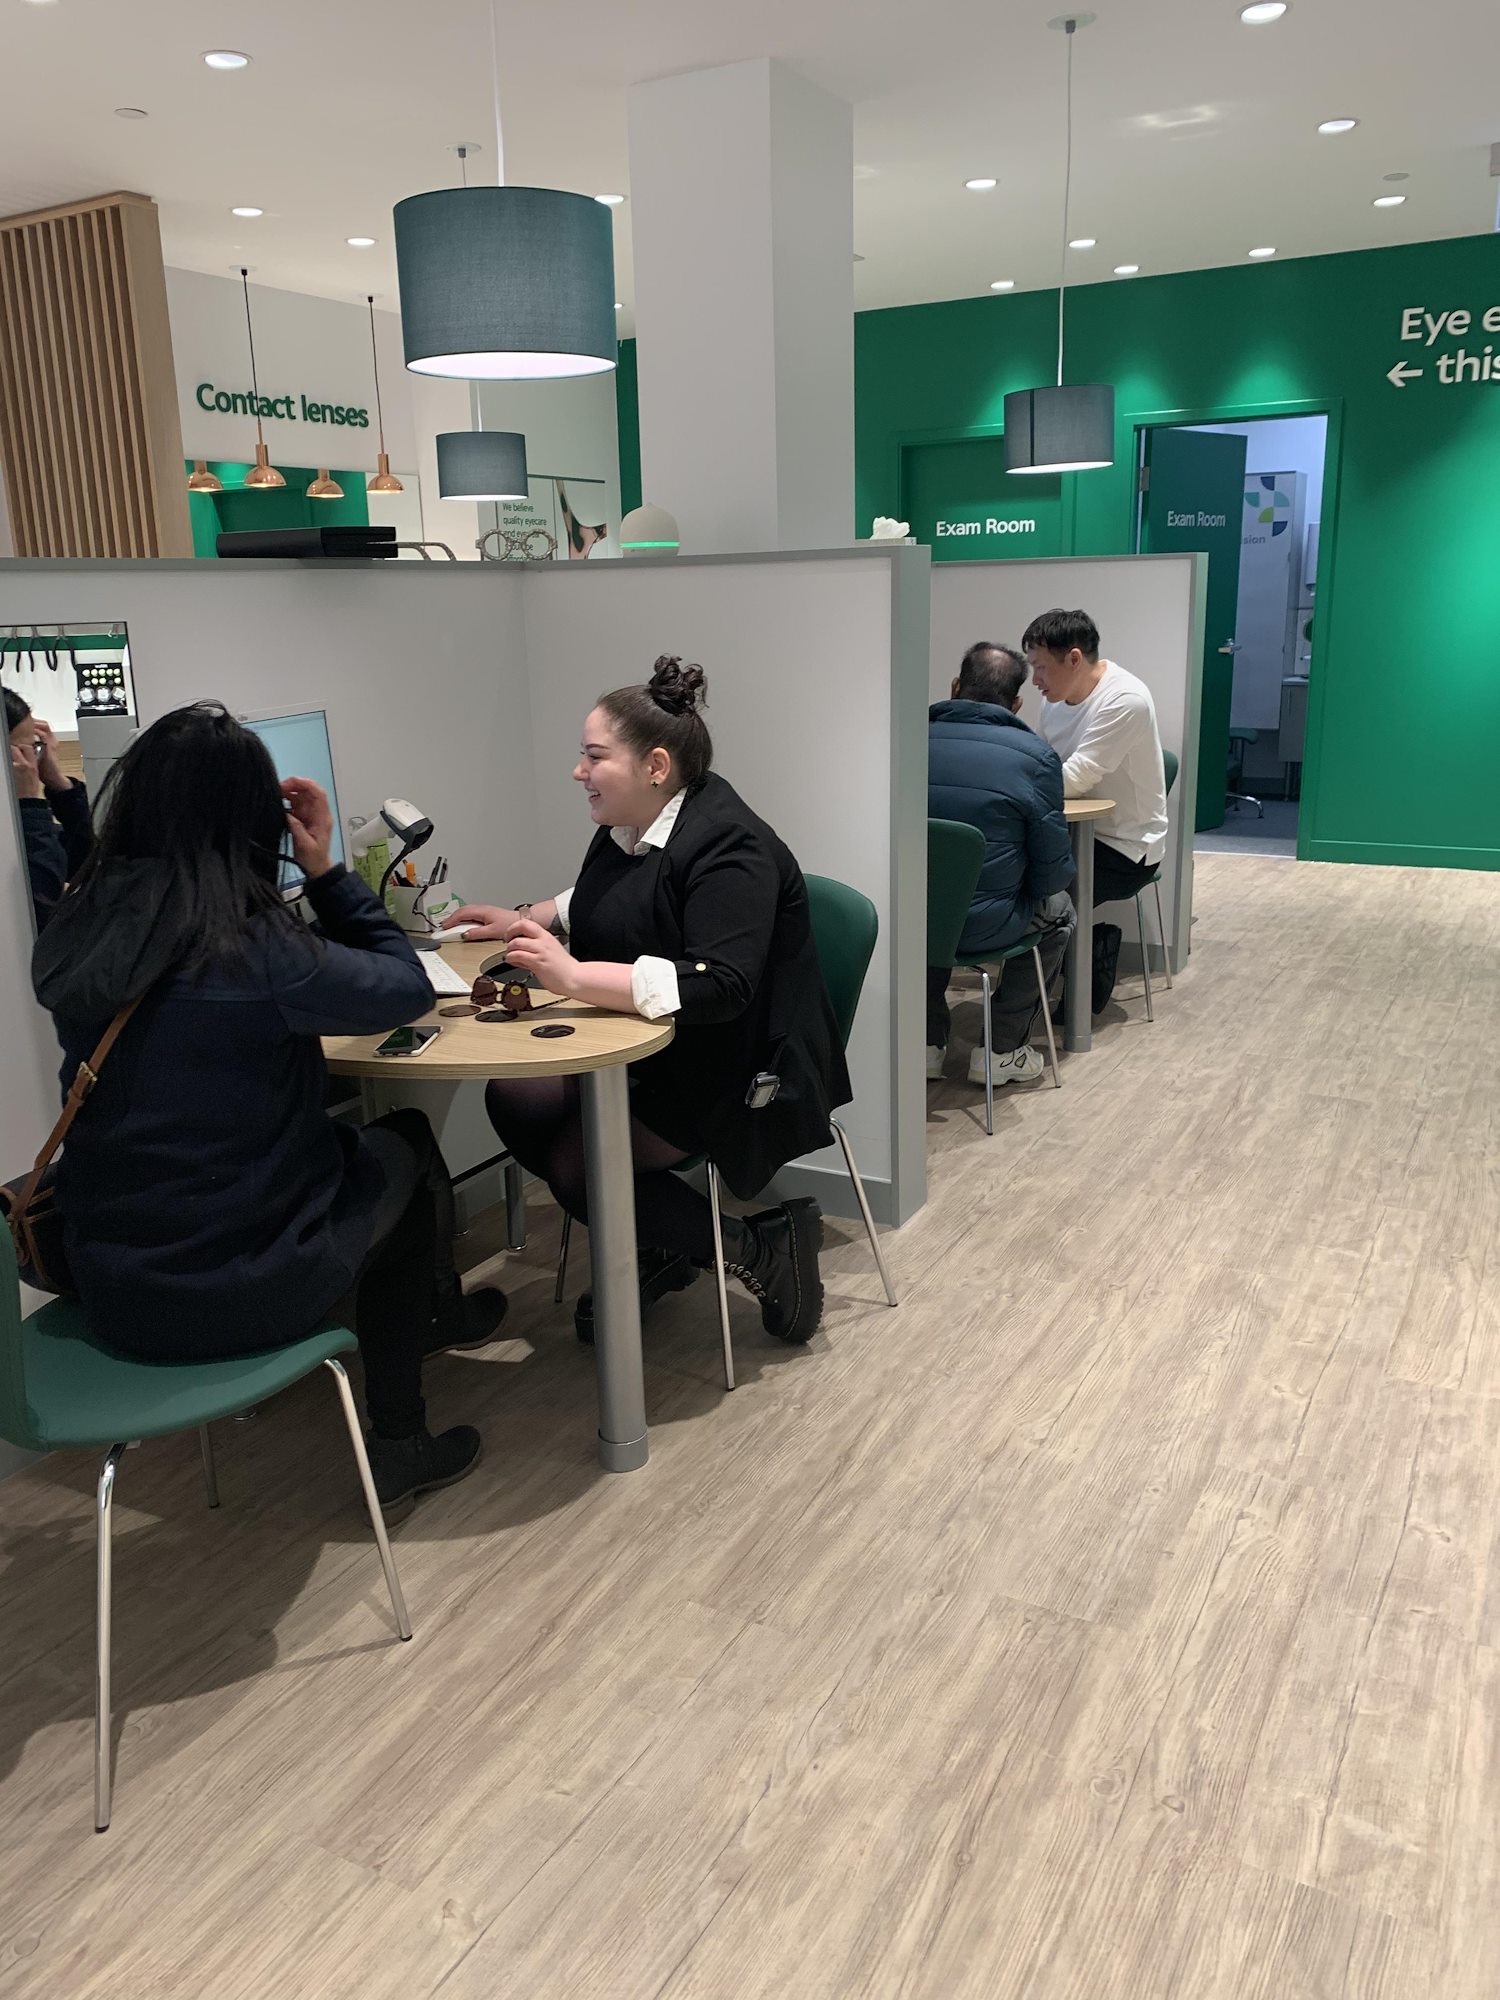 Images Specsavers Londonderry Mall